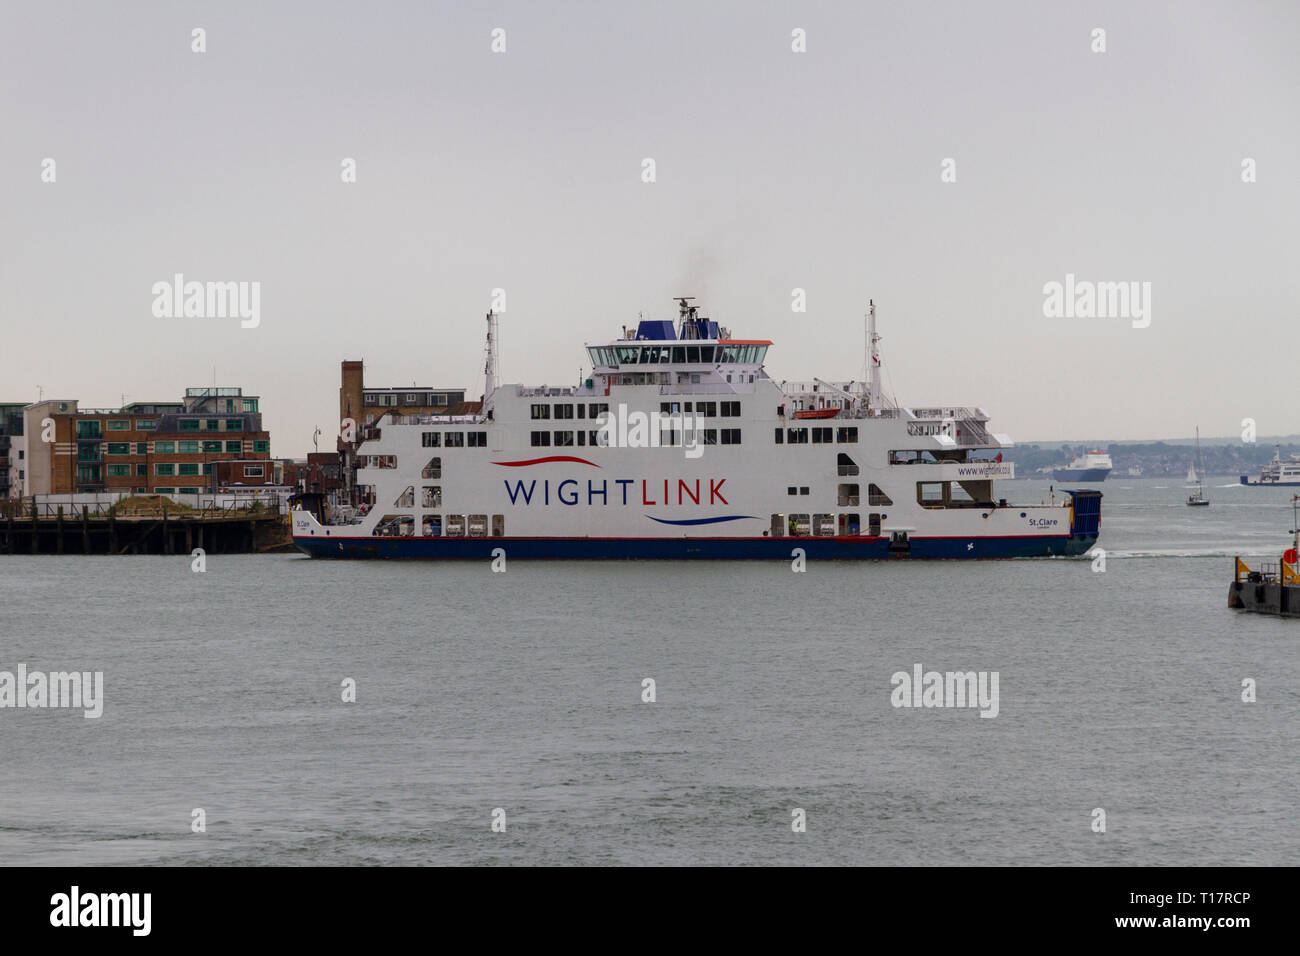 The Wightlink MV St Clare ferry which travels between Portsmouth and Fishbourne, Portsmouth Harbour, England, UK. Stock Photo